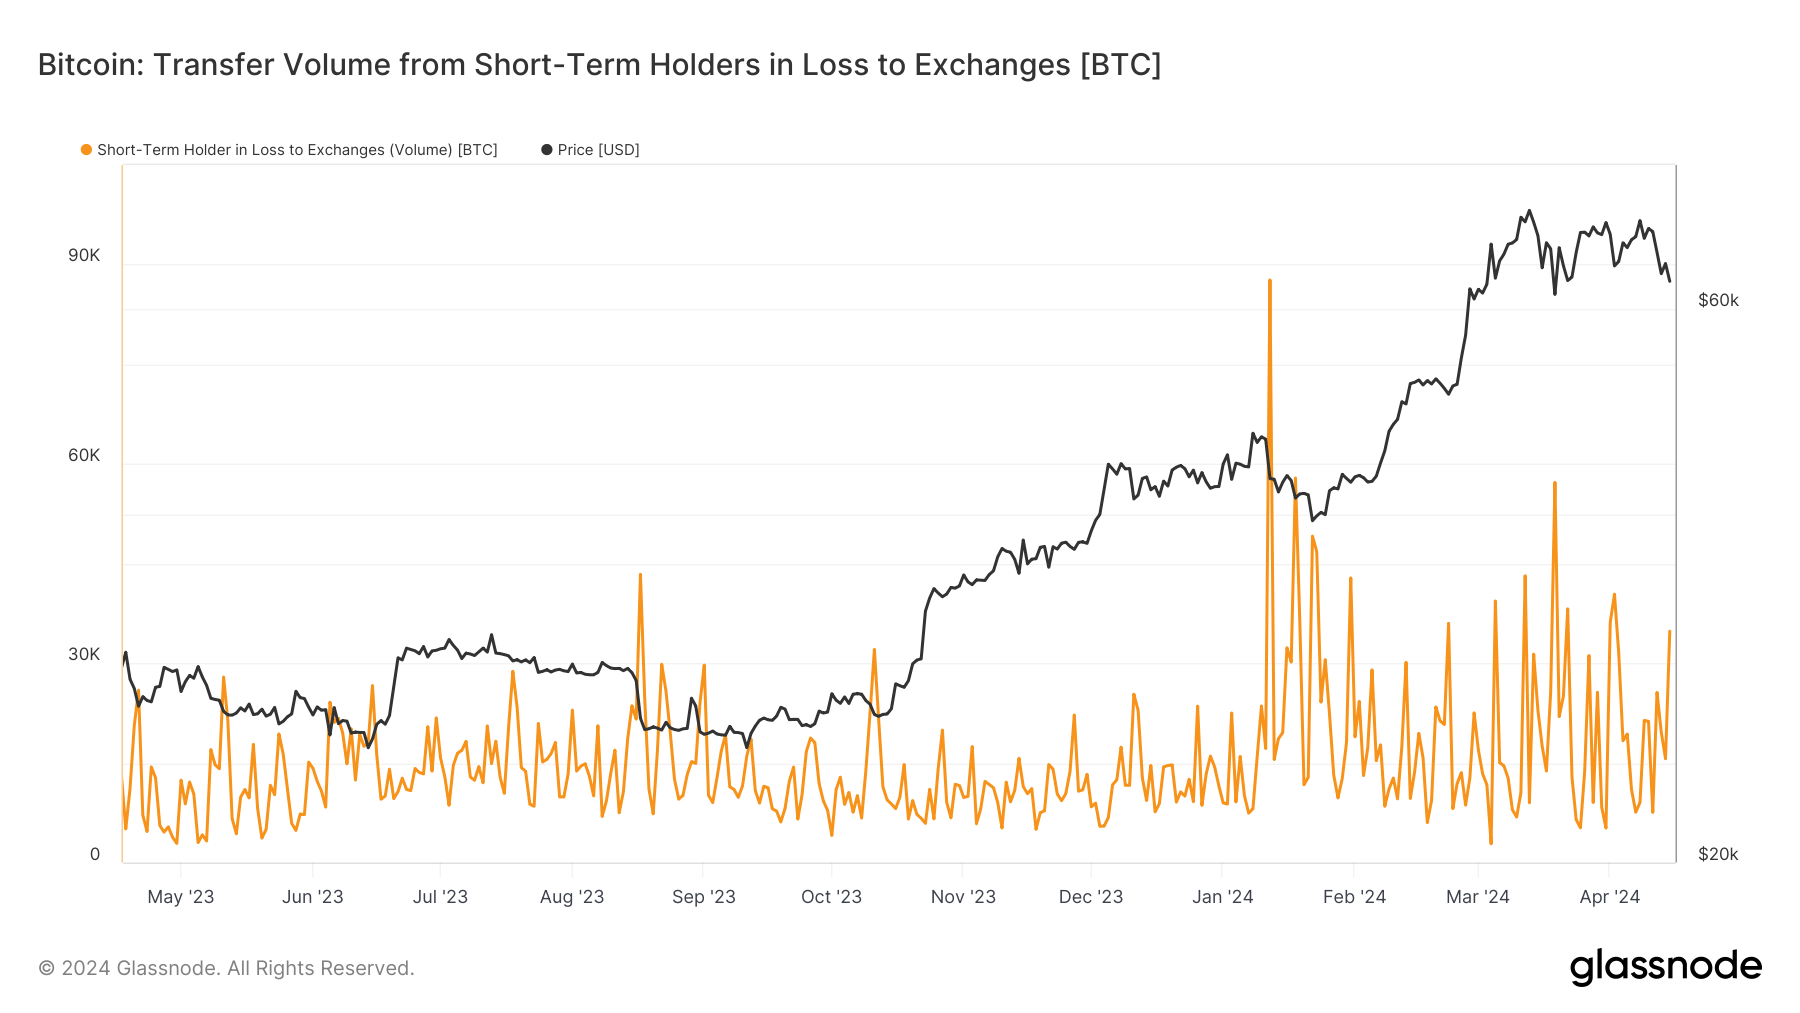 Short-Term Holders in loss to exchanges: (Source: Glassnode)